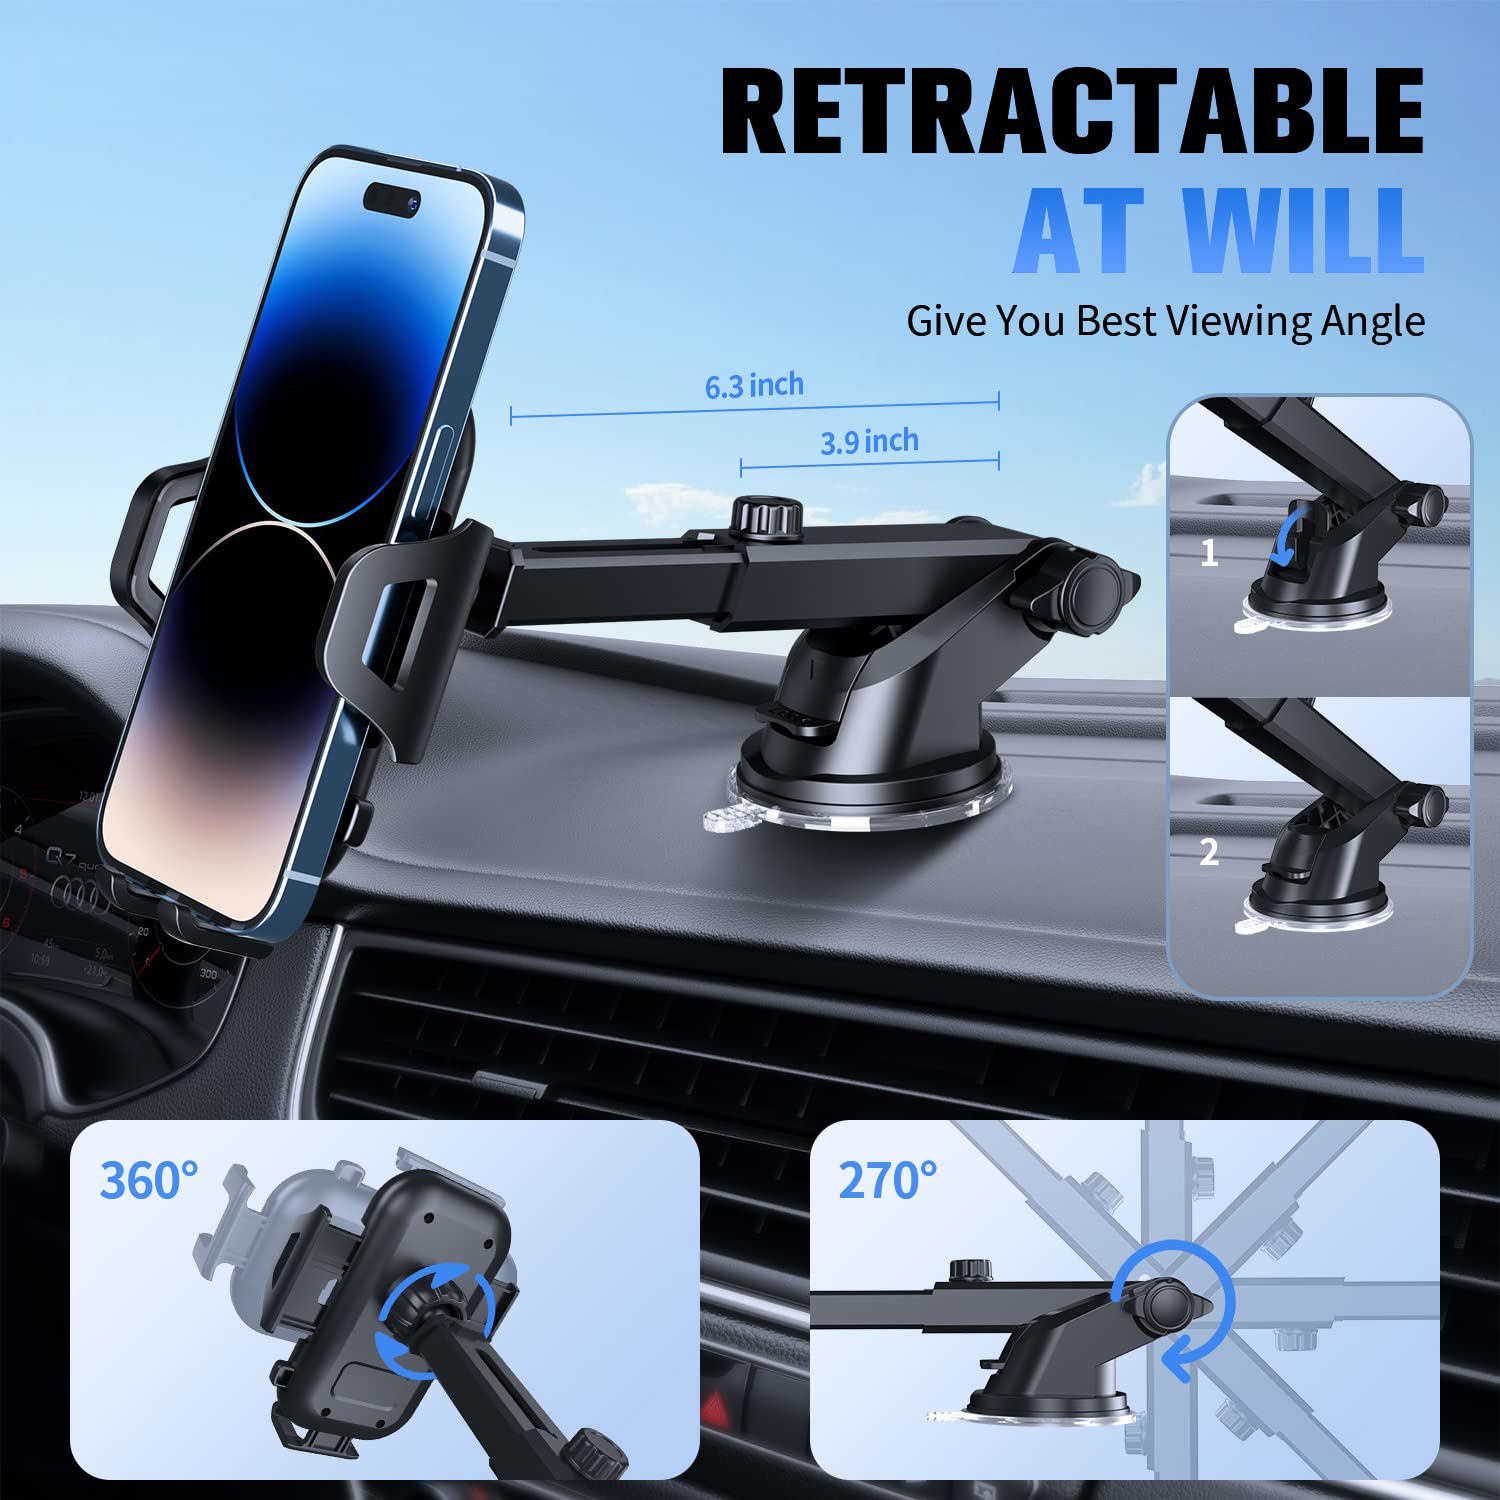 SUUSON Car Phone Holder Mount【Upgraded】-【Bumpy Roads Friendly】 Phone Mount for Car Dashboard Windshield Air Vent 3 in 1,Hand Free Mount for iPhone 14 13 12 Pro Max Samsung All Cell Phones (Black)